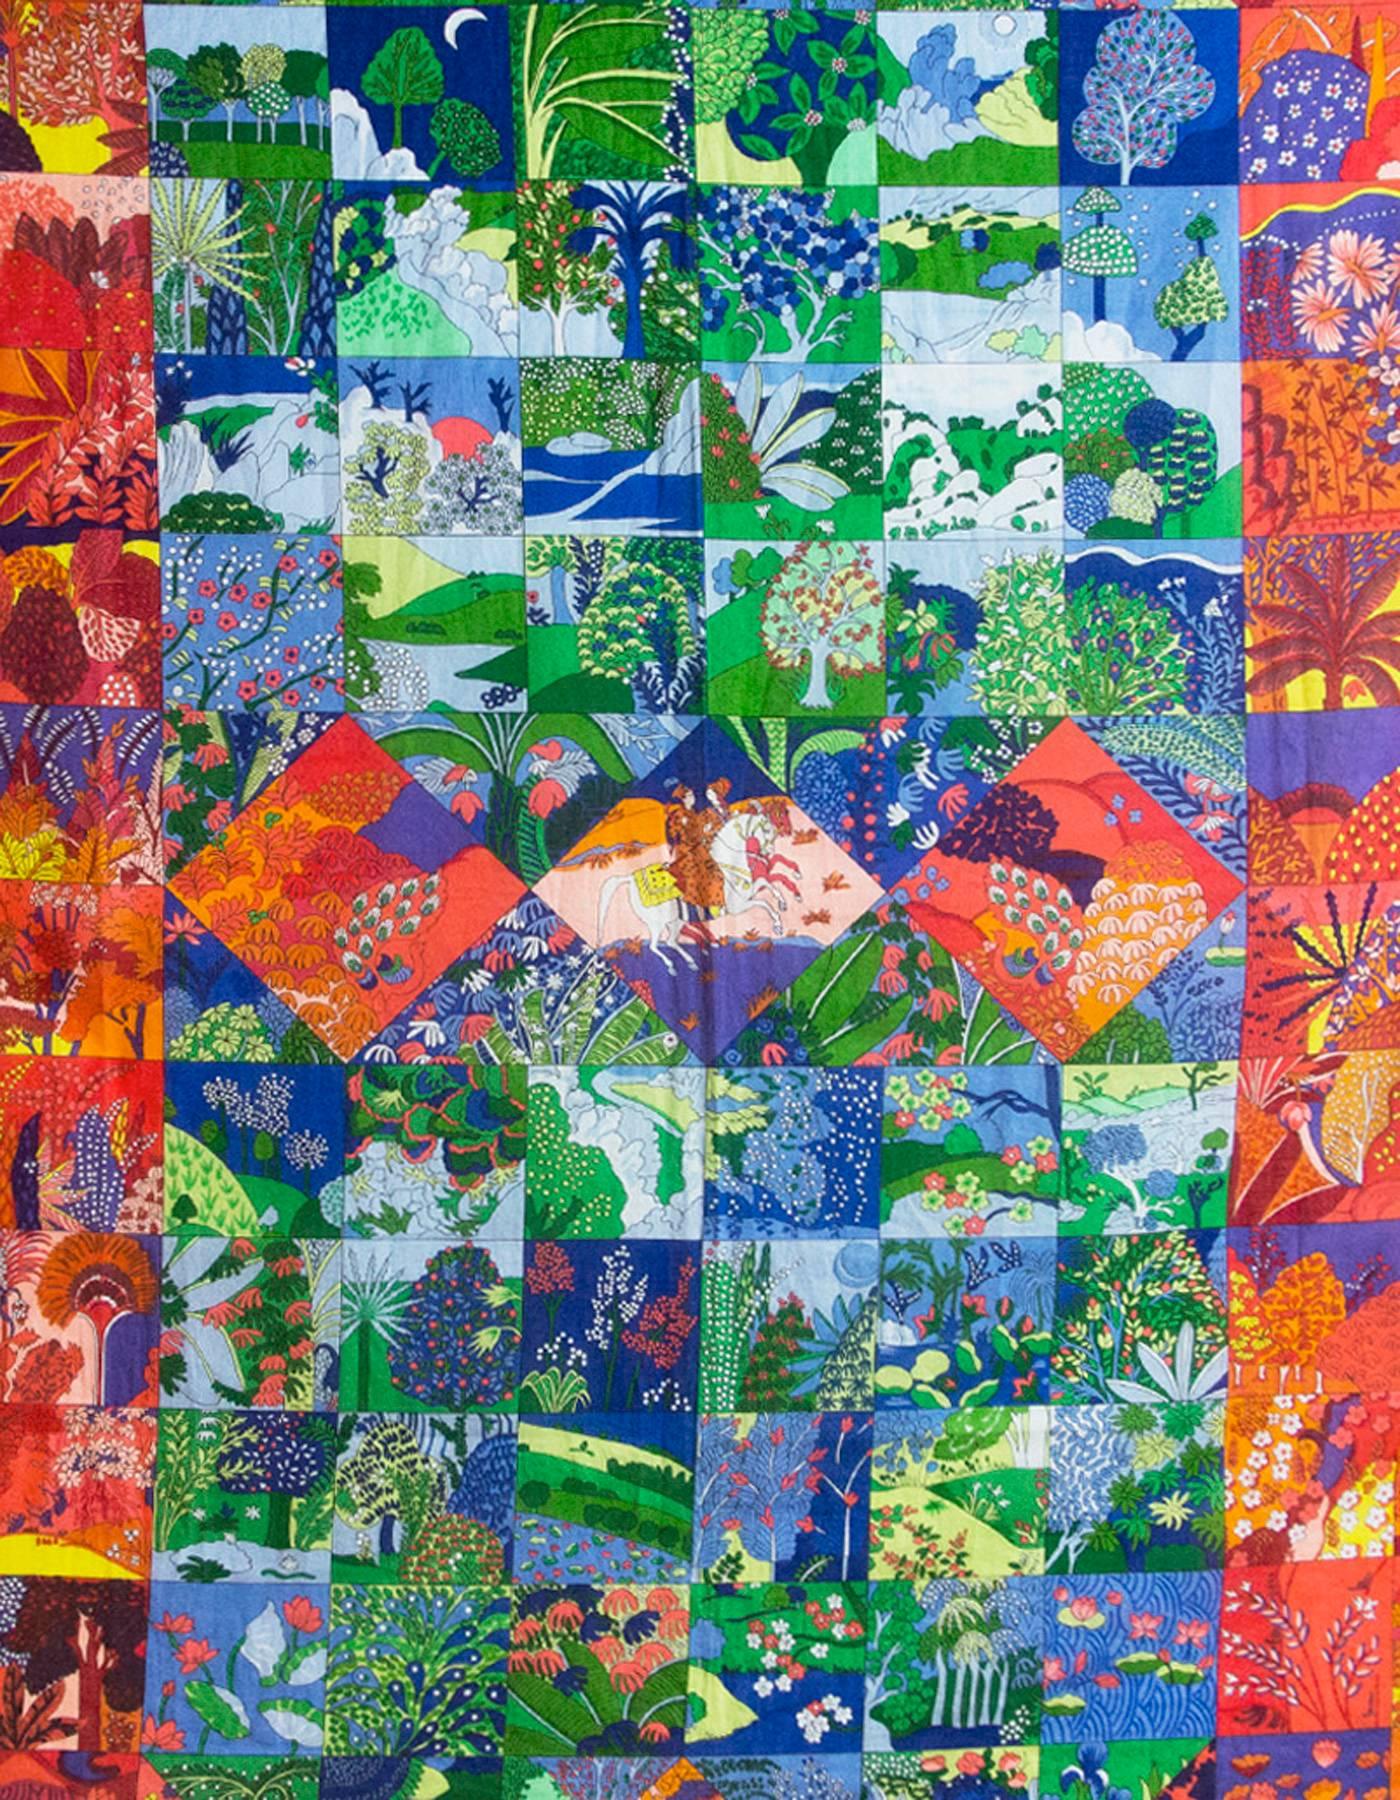 Hermes Multi-Colored Tree Print Cotton Pareo Wrap/Scarf 
Features large tree printed in center

Made In: France
Color: Multi-colored
Composition: 100% Cotton
Retail Price: $610 + tax
Overall Condition: Excellent pre-owned